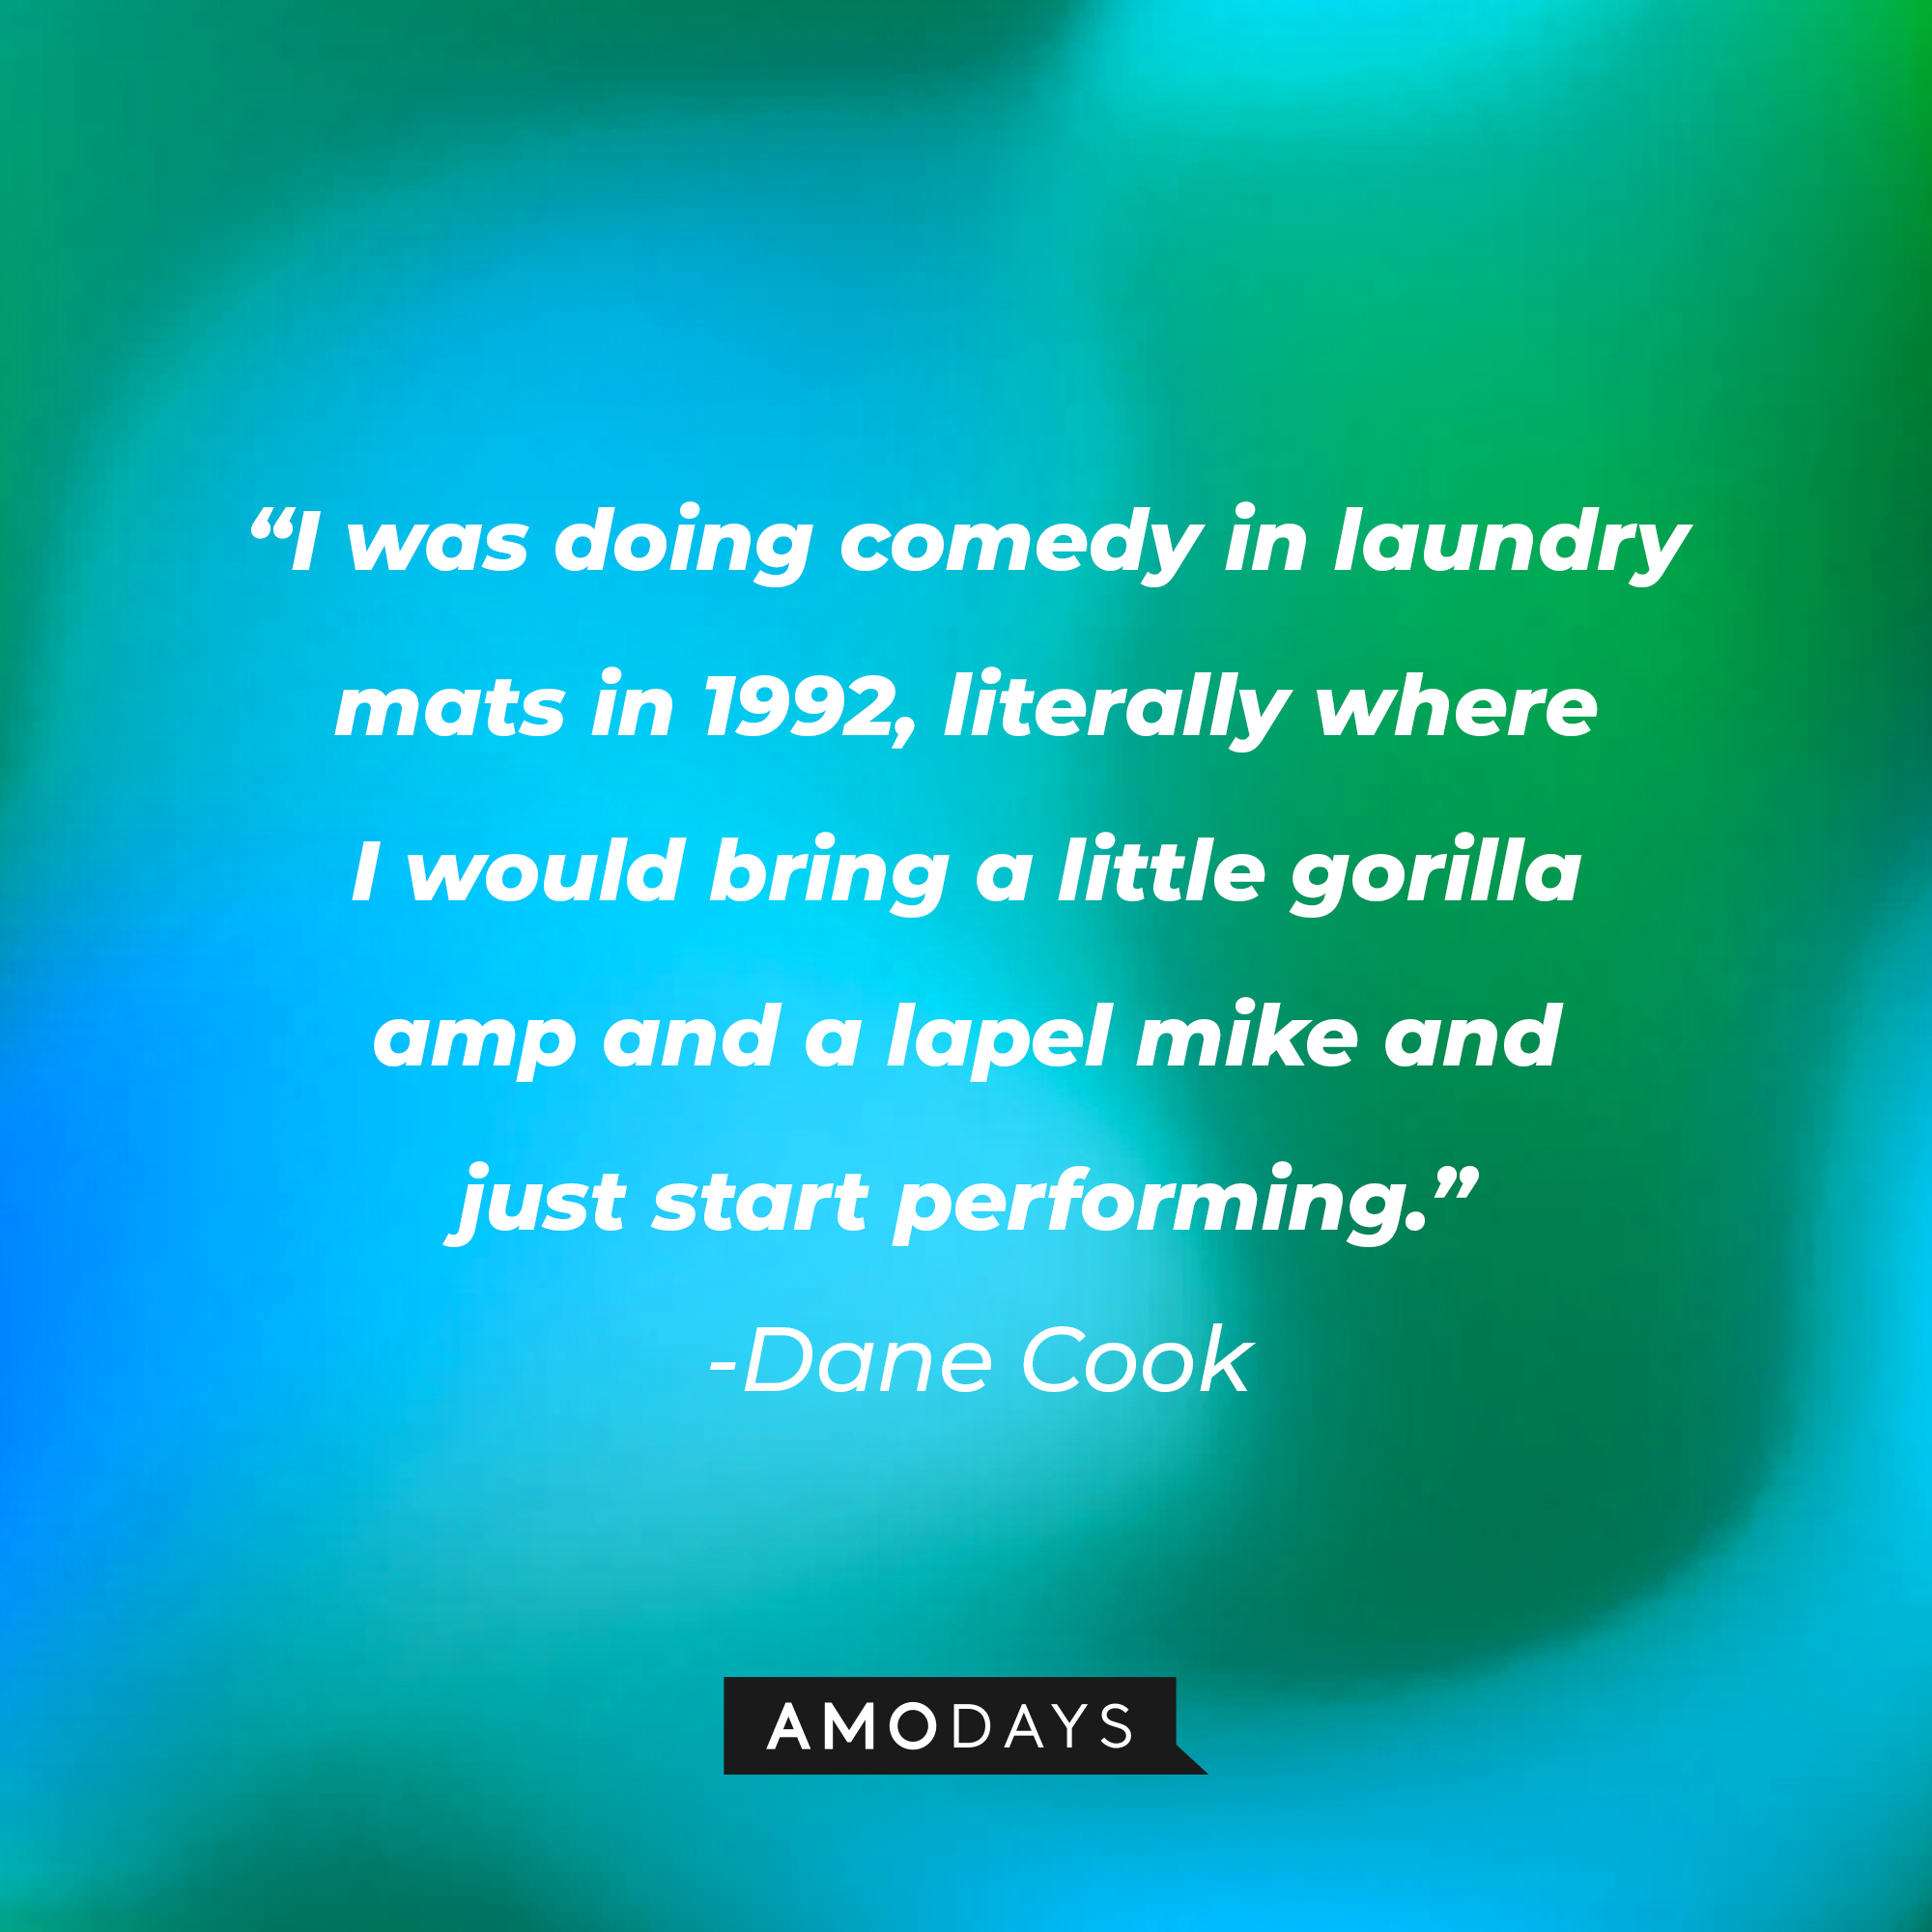 Dane Cook's quote: "I was doing comedy in laundry mats in 1992, literally where I would bring a little gorilla amp and a lapel mike and just start performing.” | Source: Amodays